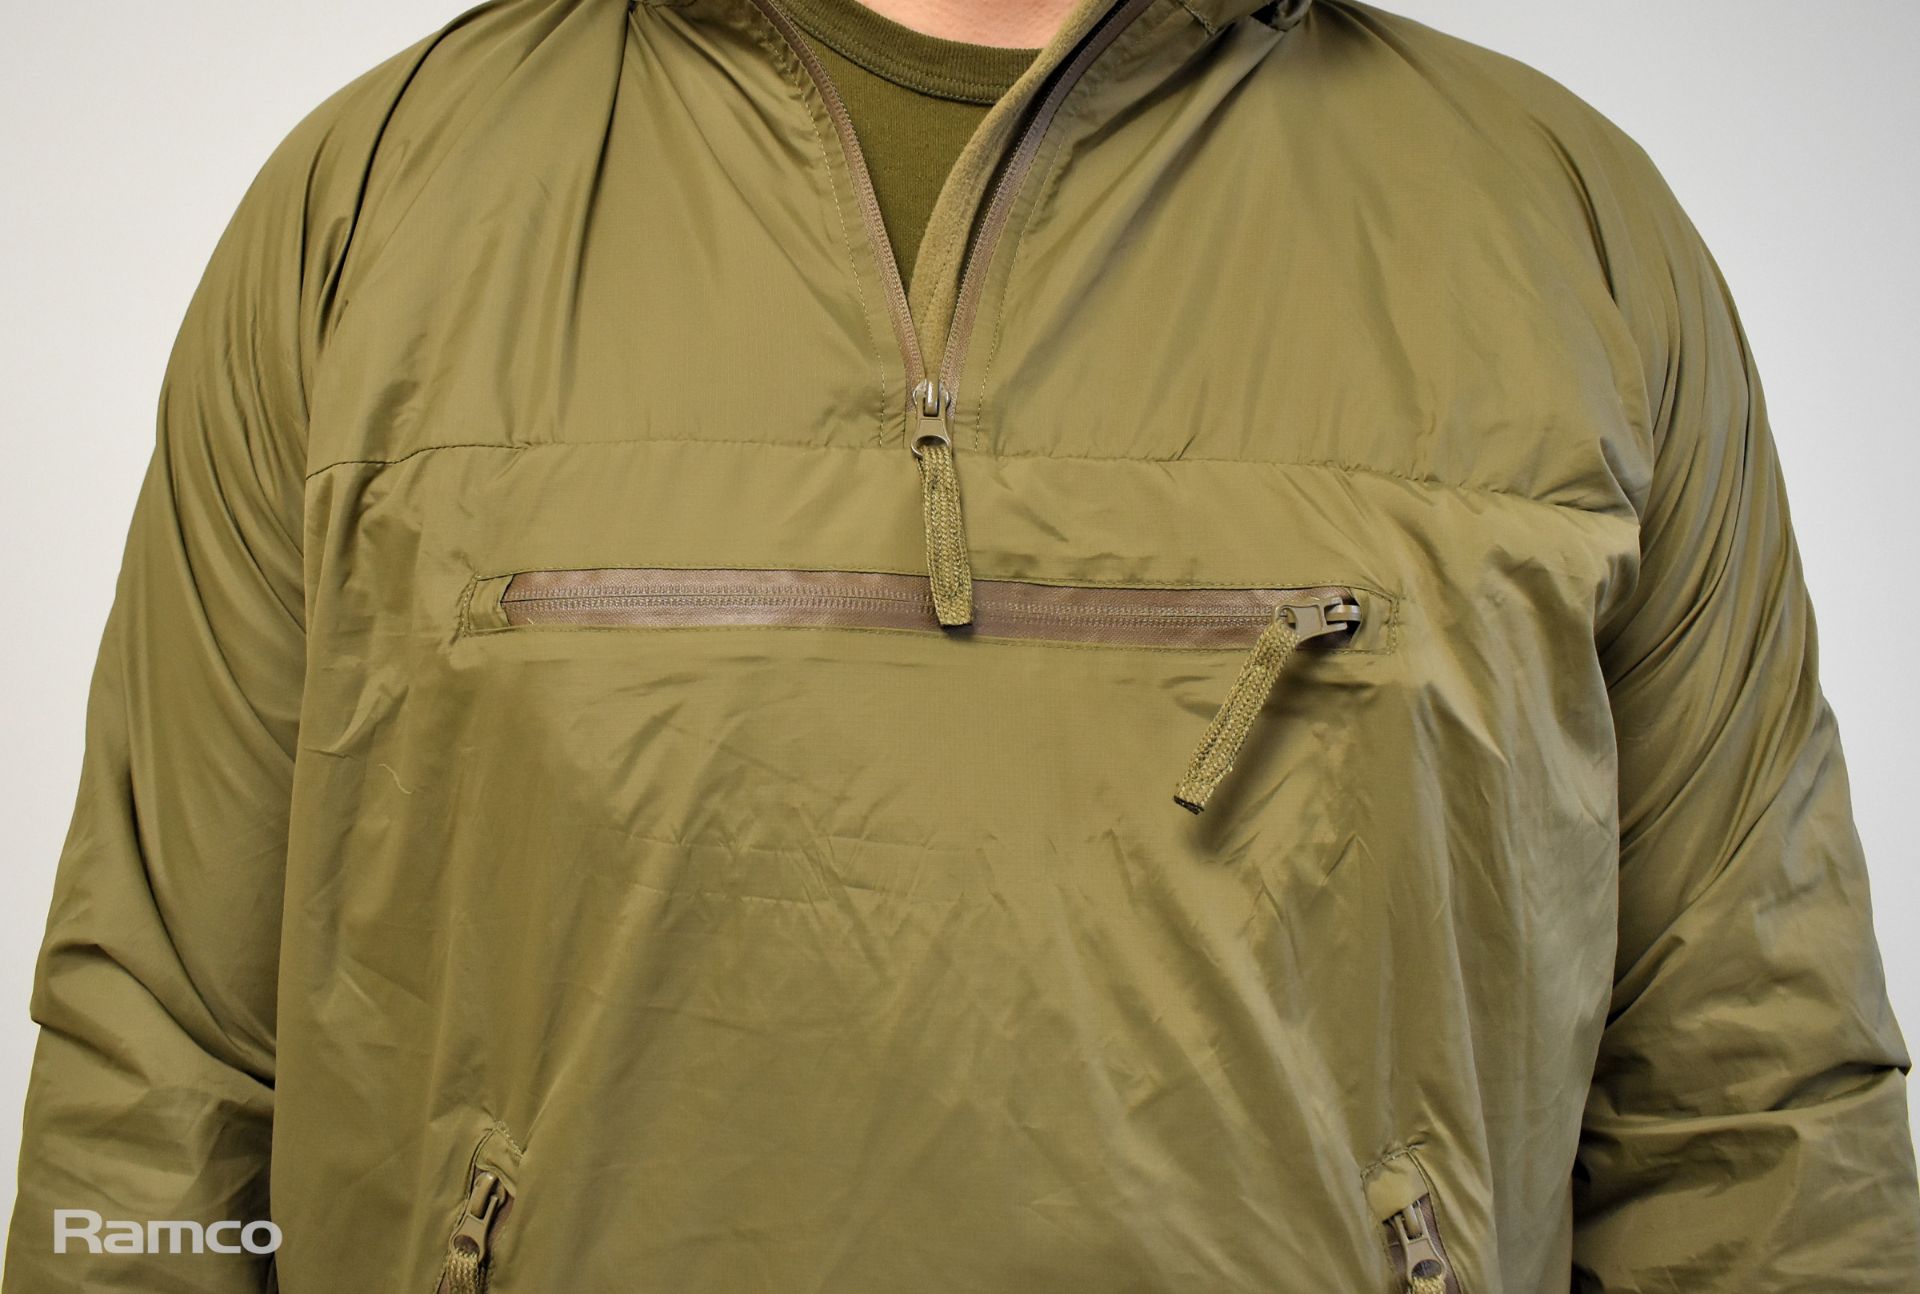 65x British Army MTP lightweight thermal smocks - mixed grades and sizes - Image 5 of 6